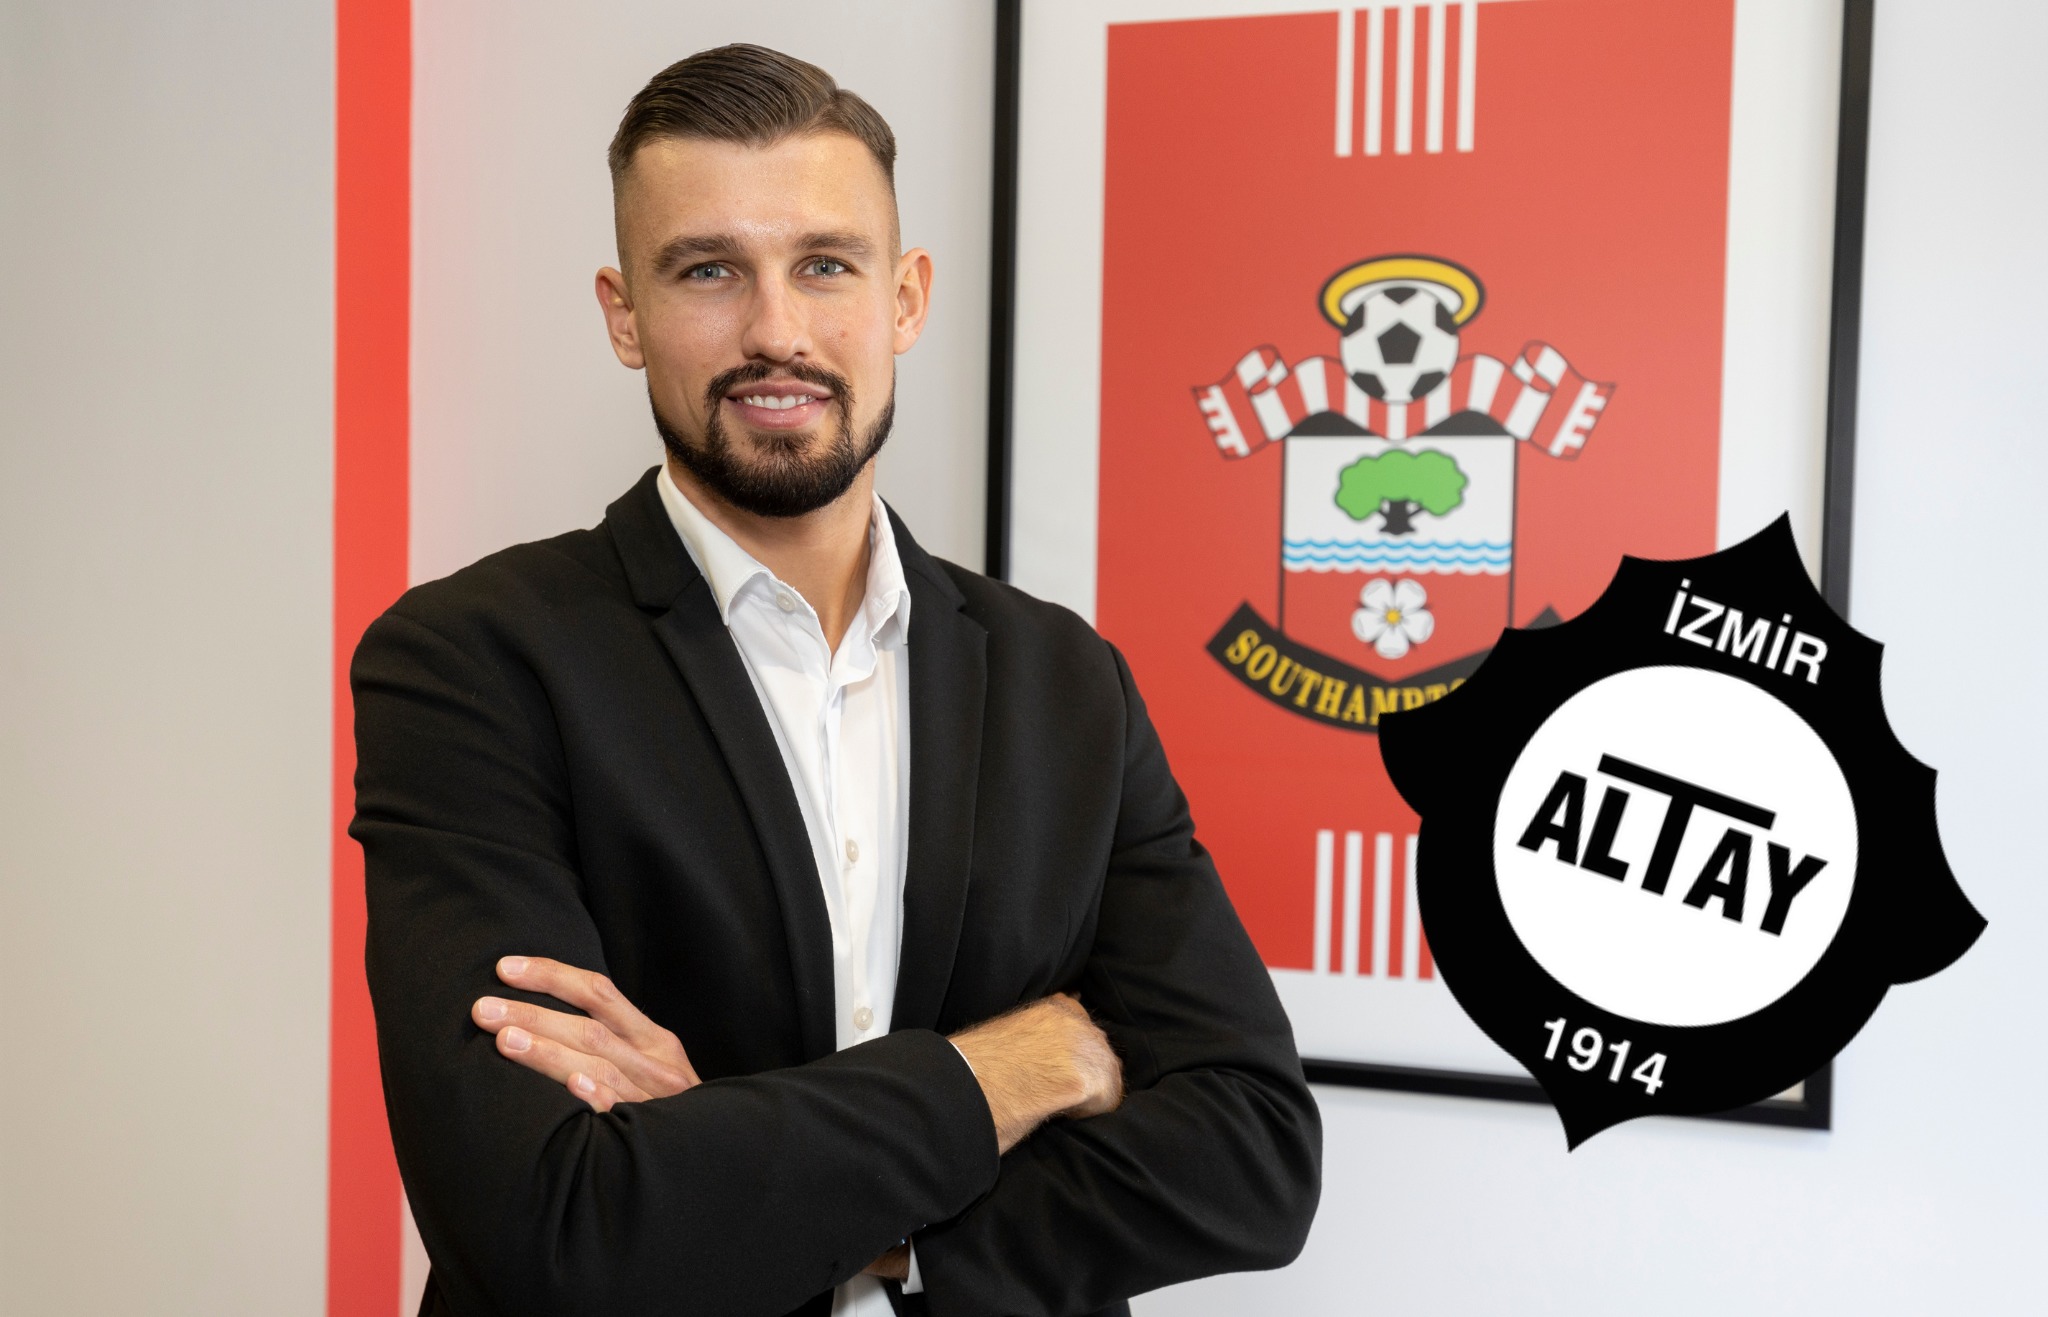 Southampton FC's Mateusz Lis still owed €175,000 by Altay SK and could be due more